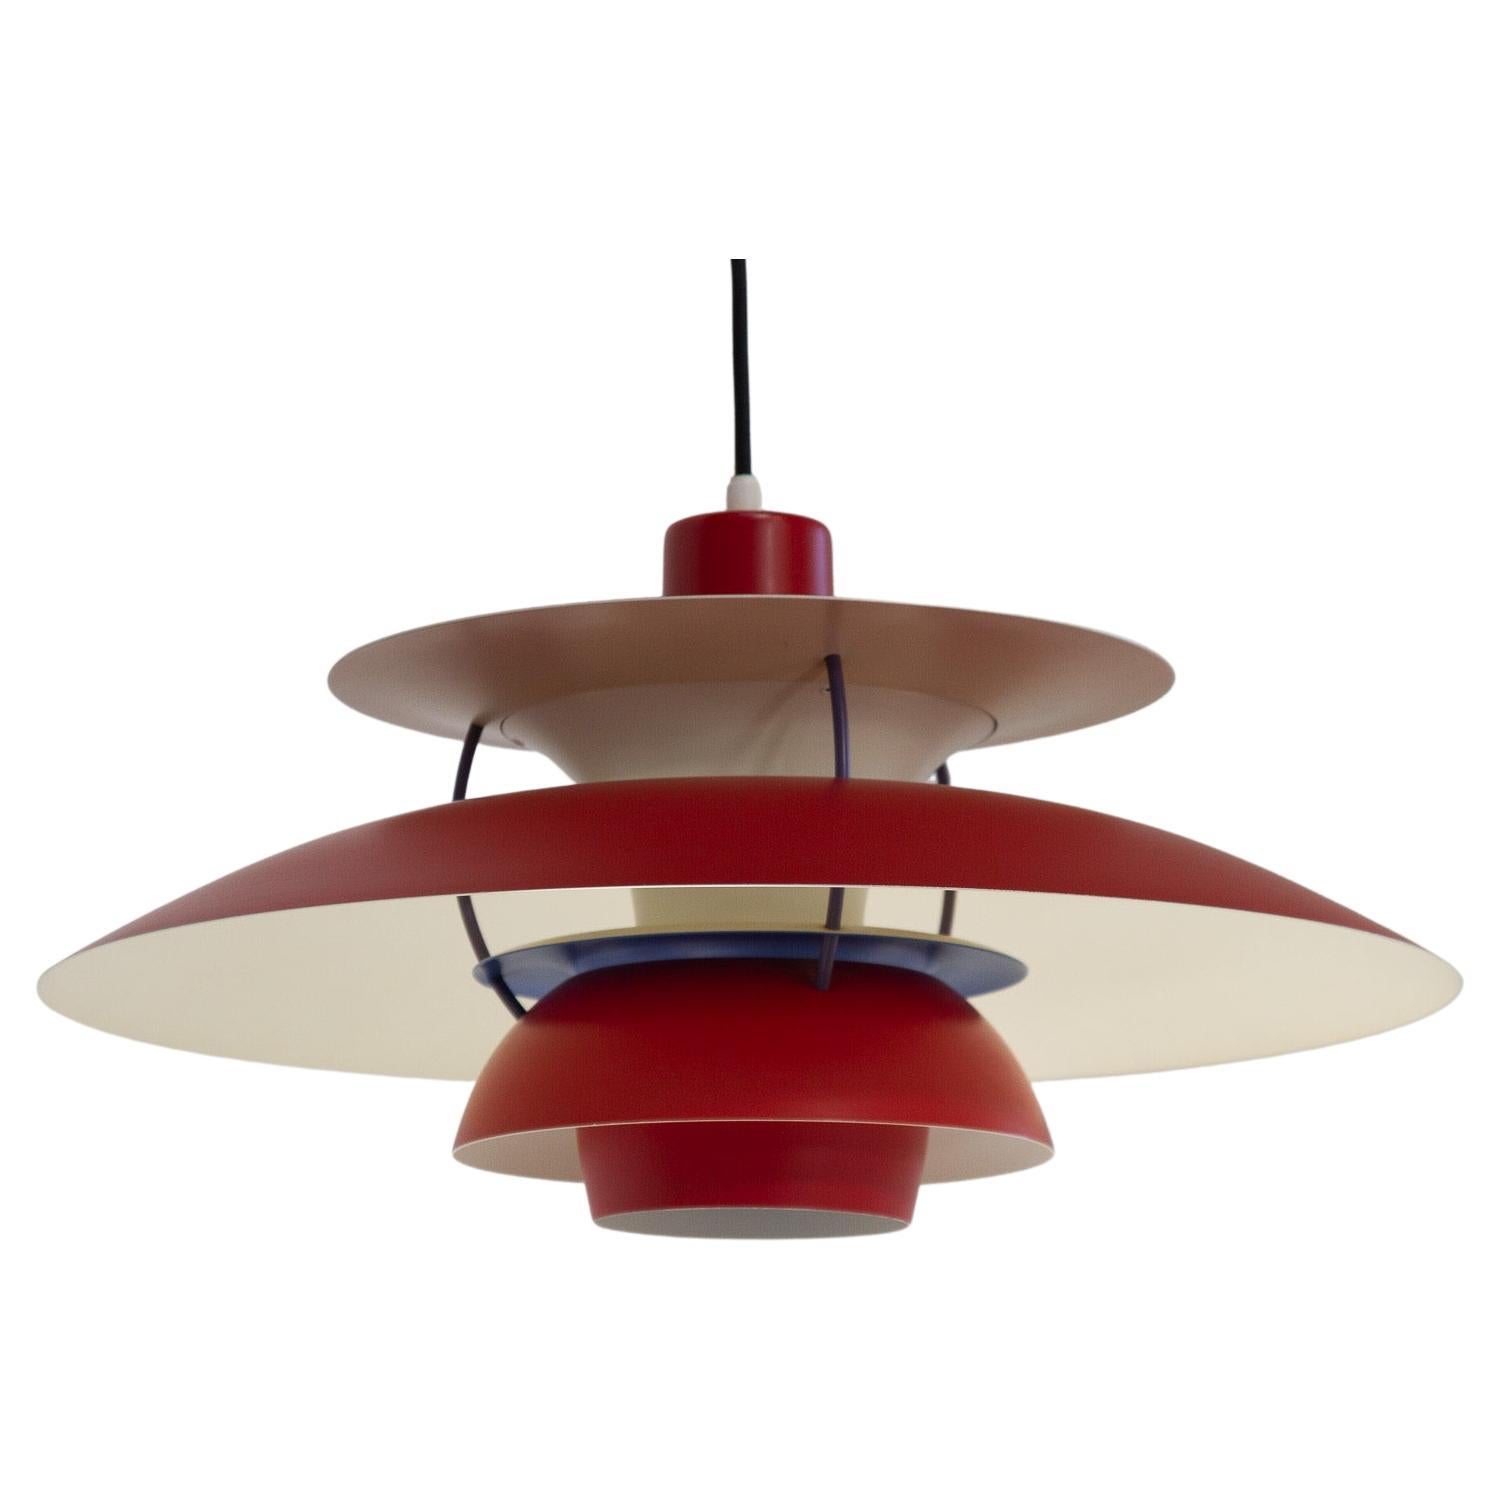 Danish Vintage red ceiling pendant PH5 by Poul Henningsen, 1960s.
Iconic Danish lighting designed in 1958 by Poul Henningsen for Louis Poulsen. This model is known as PH 5 because it has five individual shades. Emits a soft light outwards and